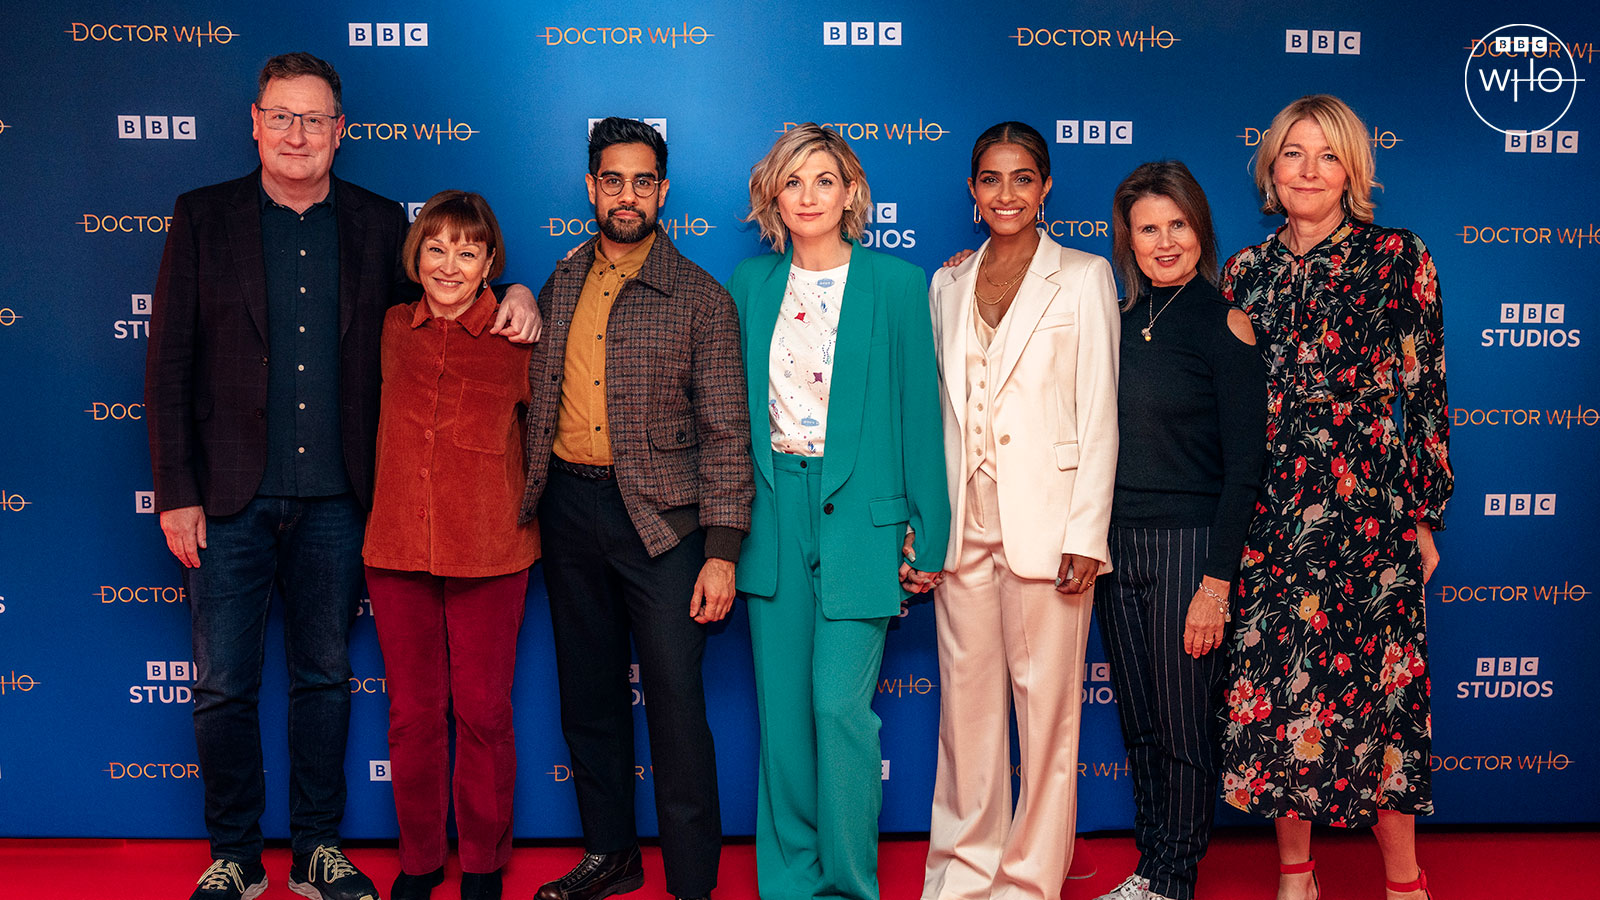 Chris Chibnall, Janet Fielding, Sacha Dhawan, Jodie Whittaker, Mandip Gill, Sophie Aldred and Jemma Redgrave at the premiere of 'The Power of the Doctor'